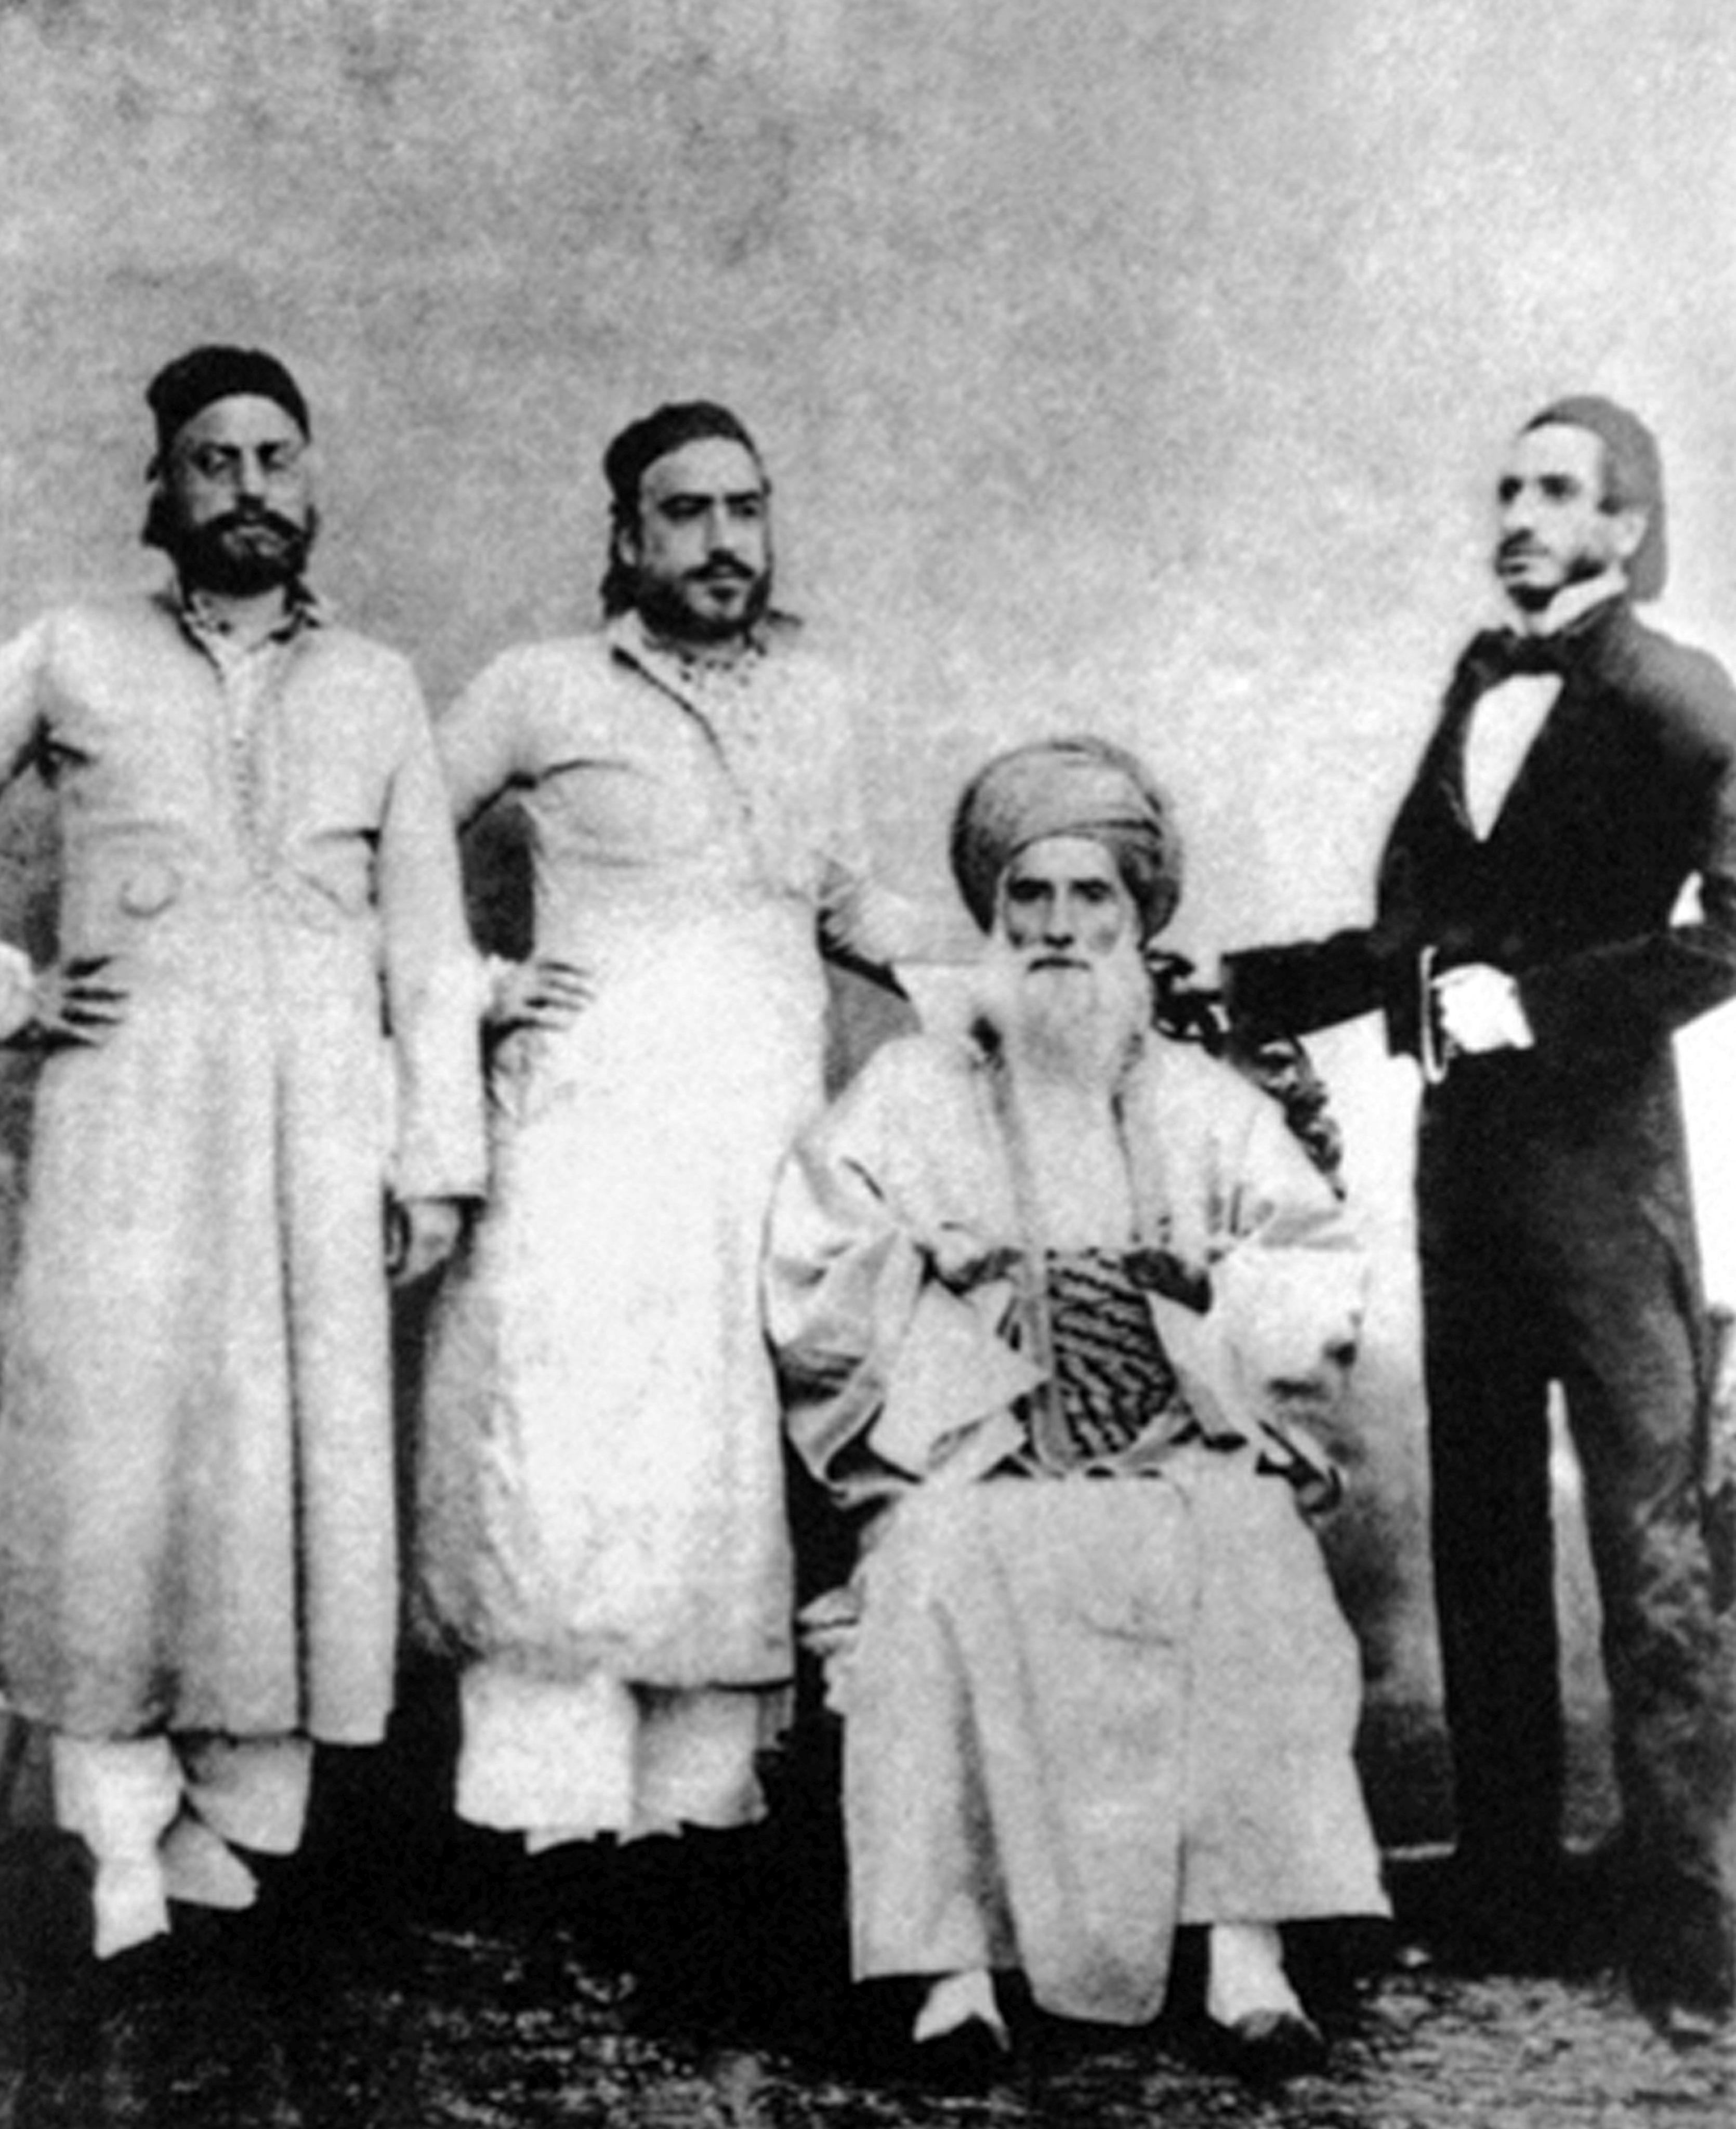 David Sassoon (seated) and his sons. Sassoon moved his family to India from Baghdad in 1832, from where the family business empire spread to Shanghai and Hong Kong. Photo: Pictures From History/Universal Images Group via Getty Images